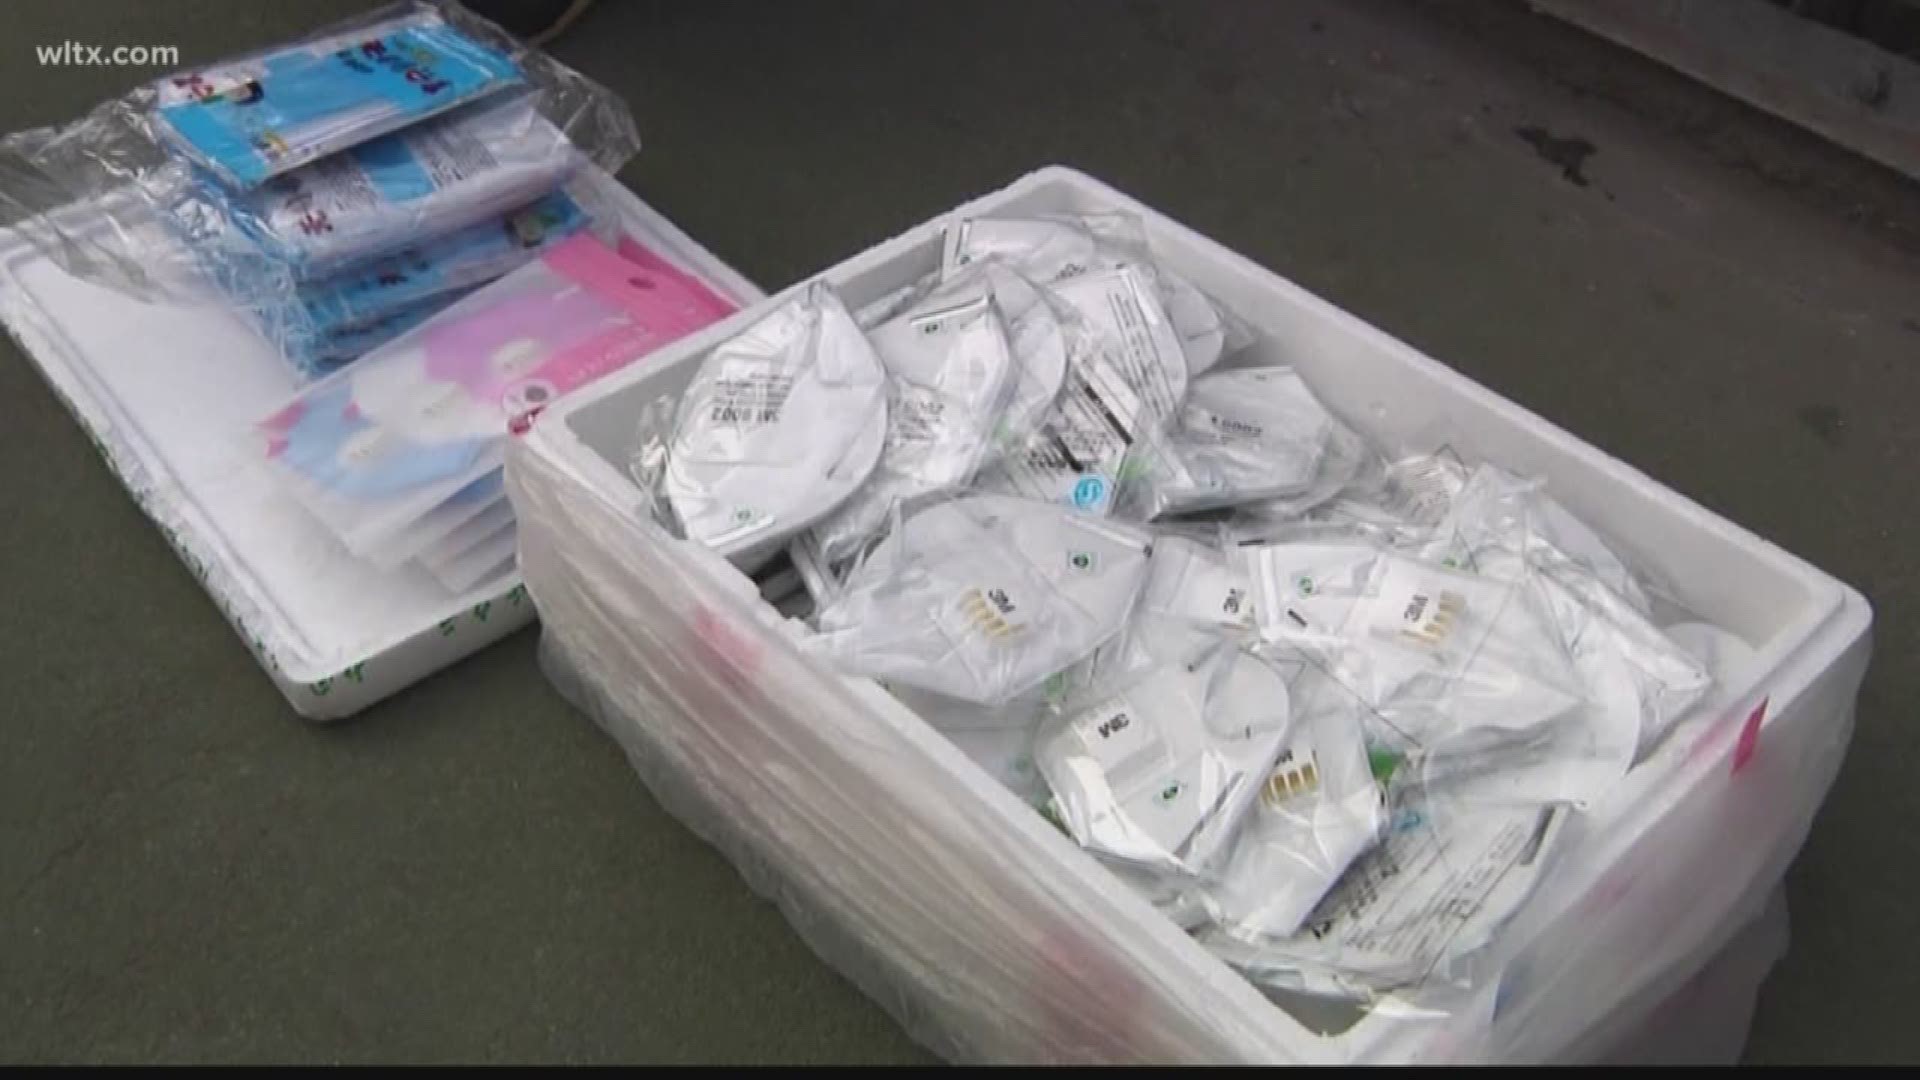 As medical supplies are running low across the country, thousands of face masks are headed to the Palmetto State - and more donations are on the way.